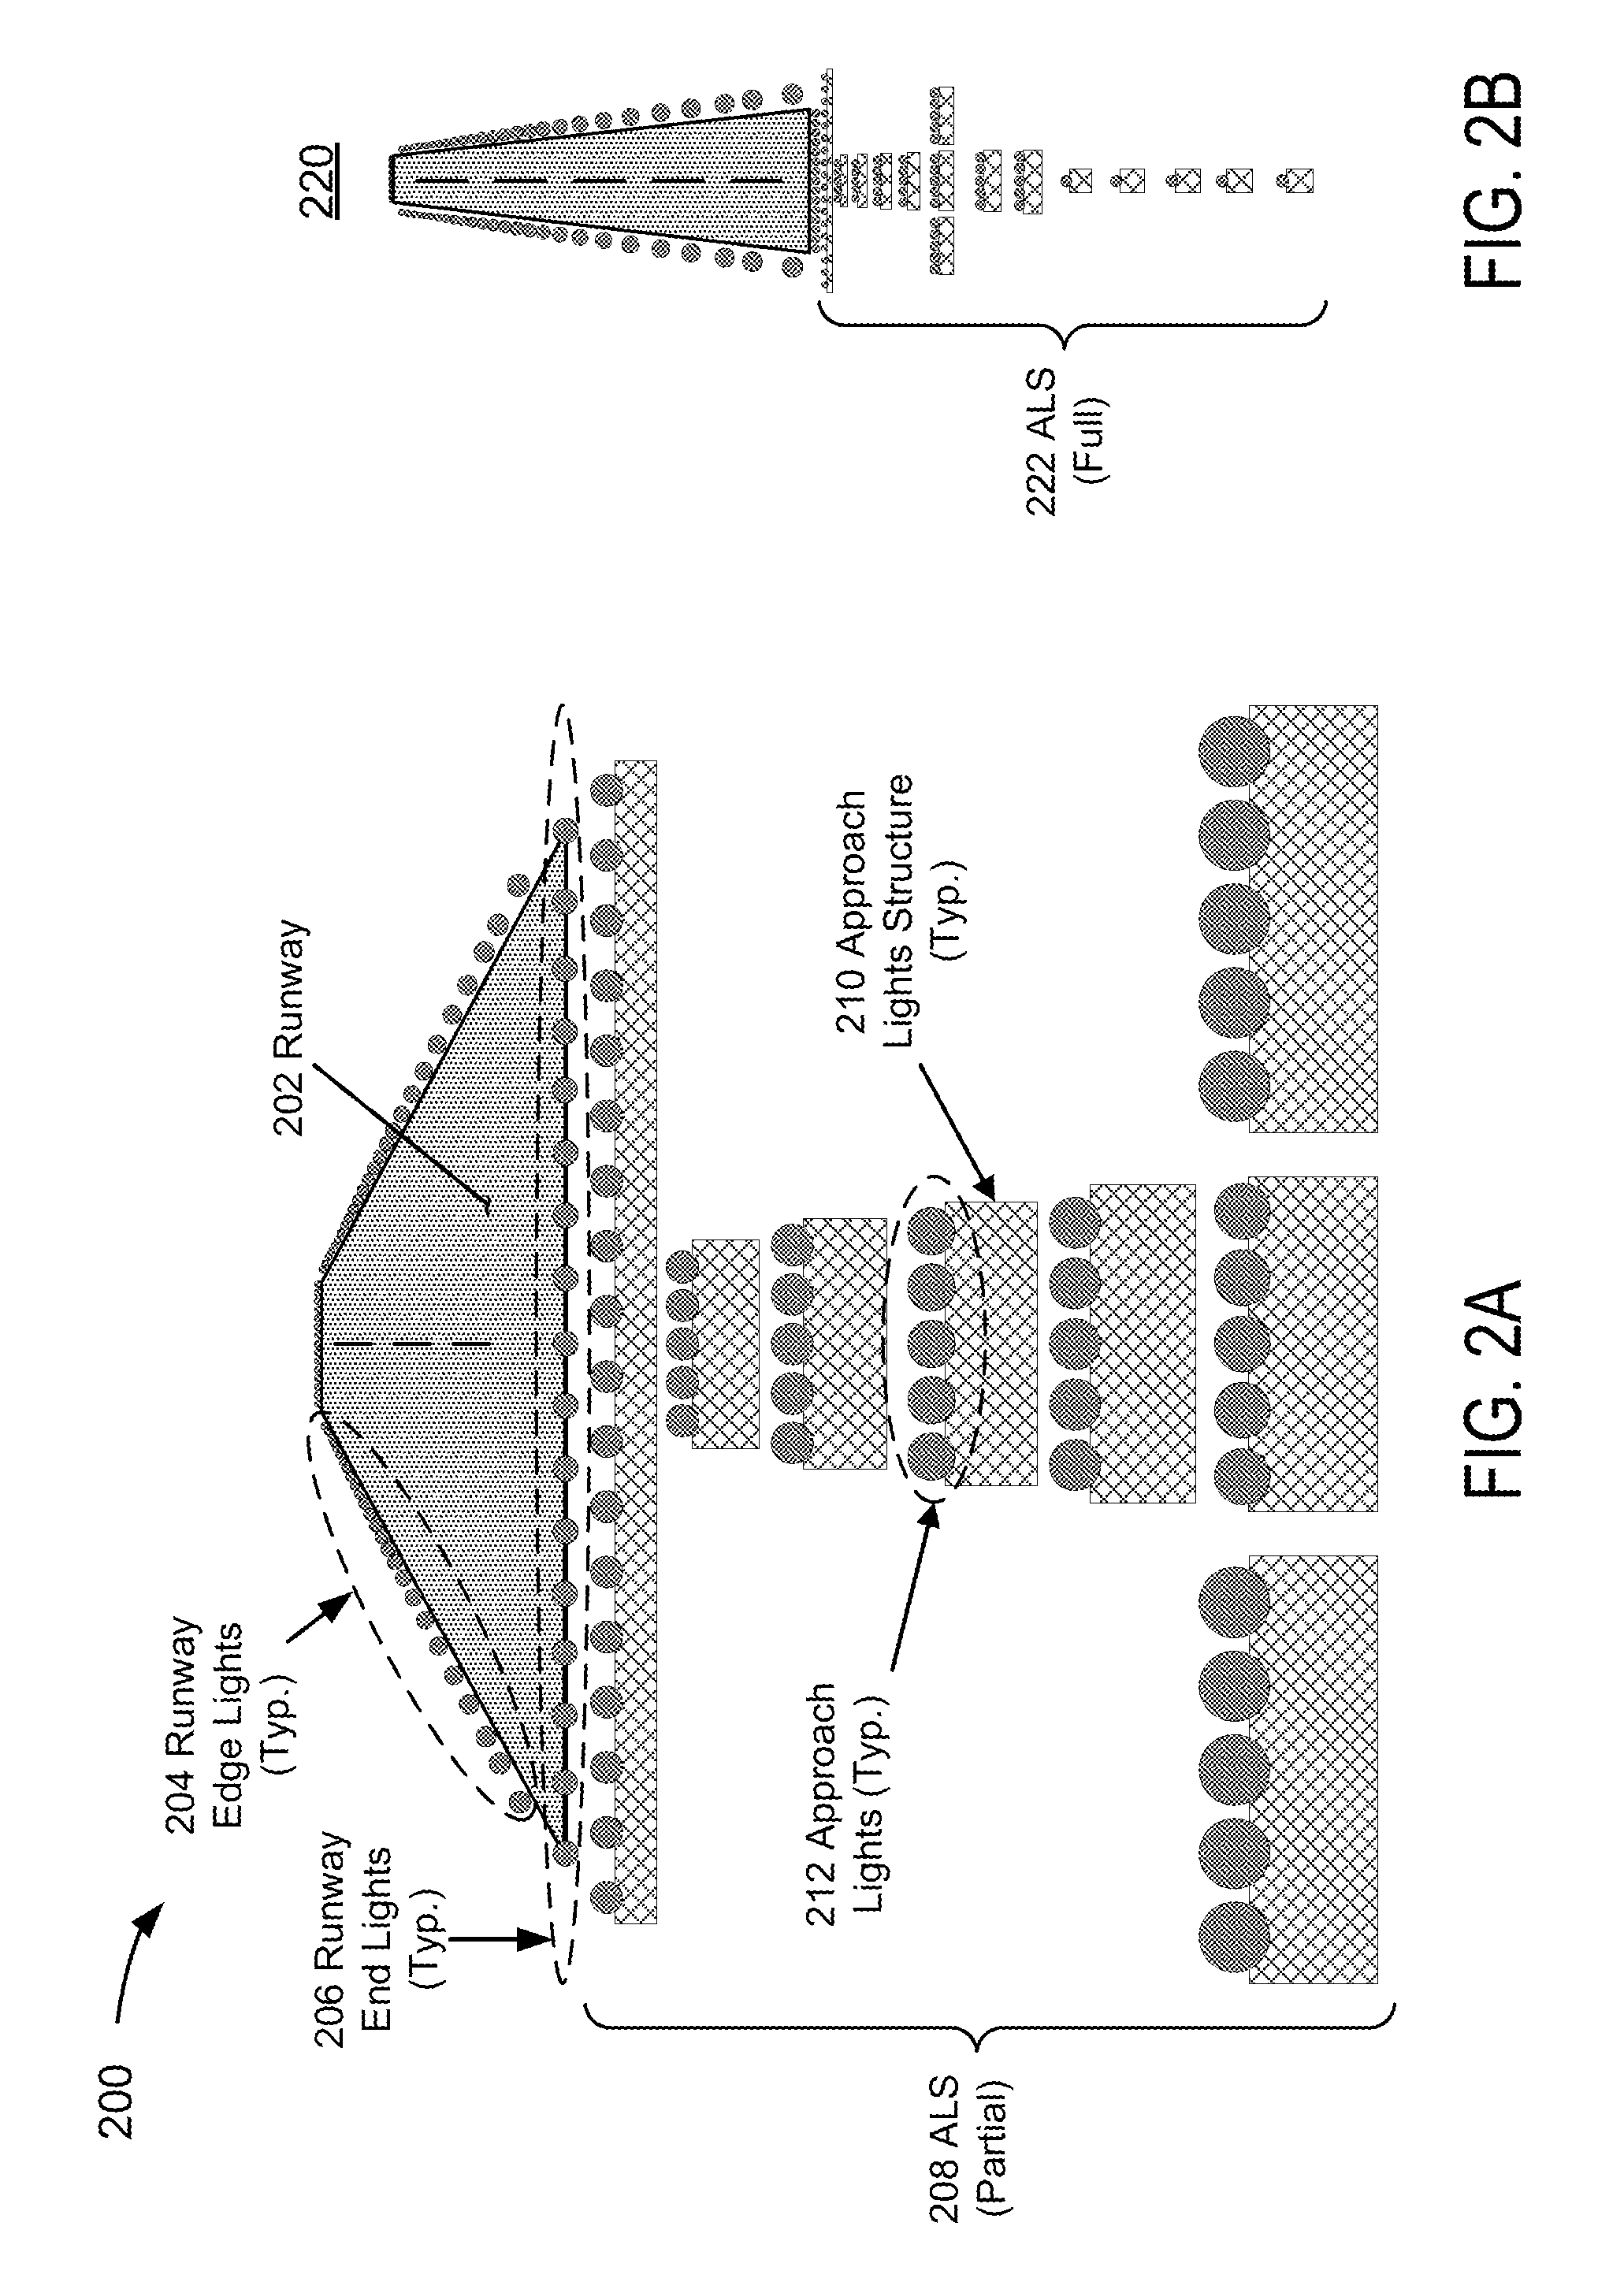 Sensor-based image(s) integrity determination system, device, and method